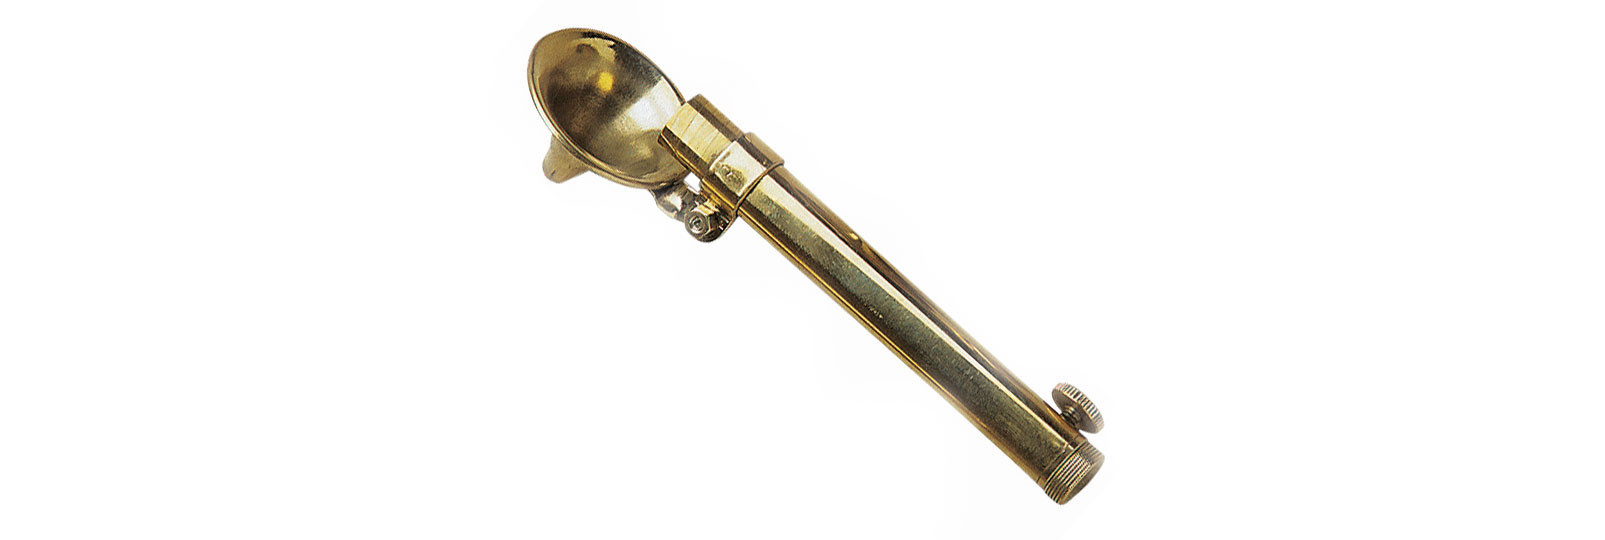 Powder measurer with overturning funnel and nipple pick